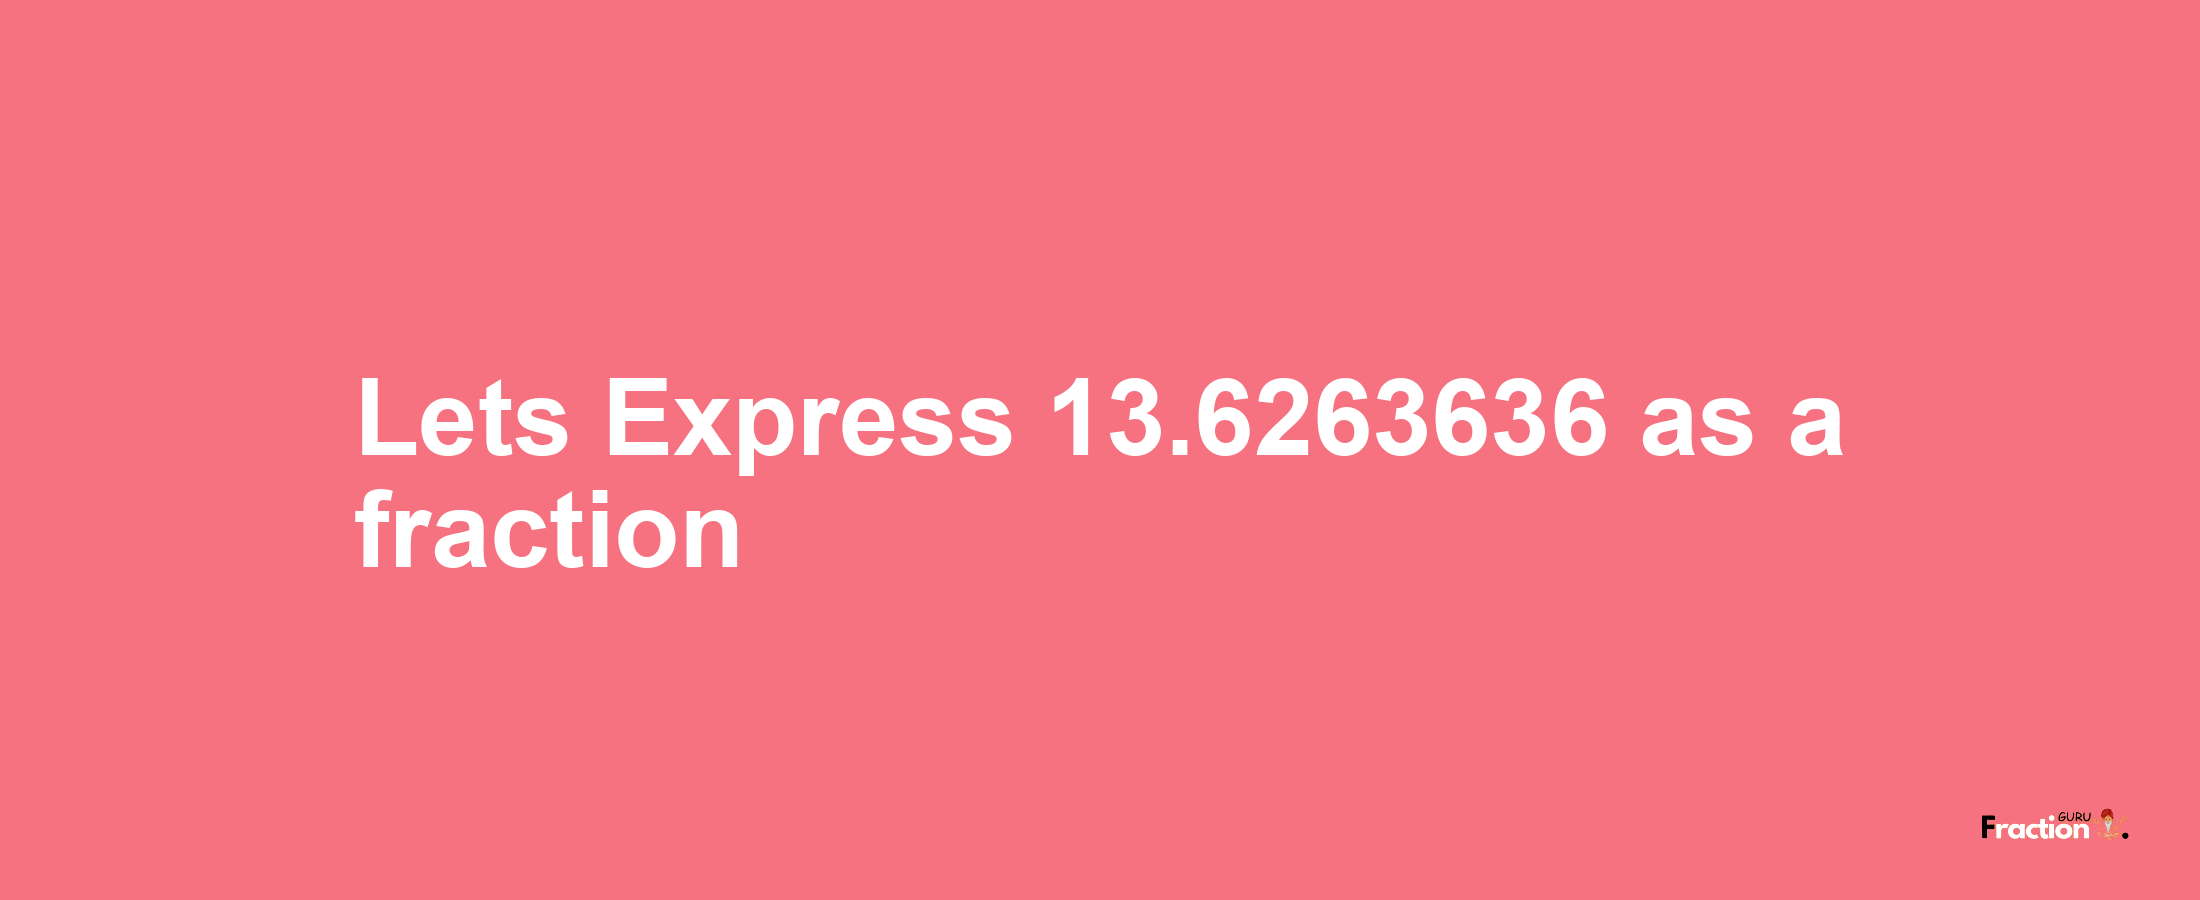 Lets Express 13.6263636 as afraction